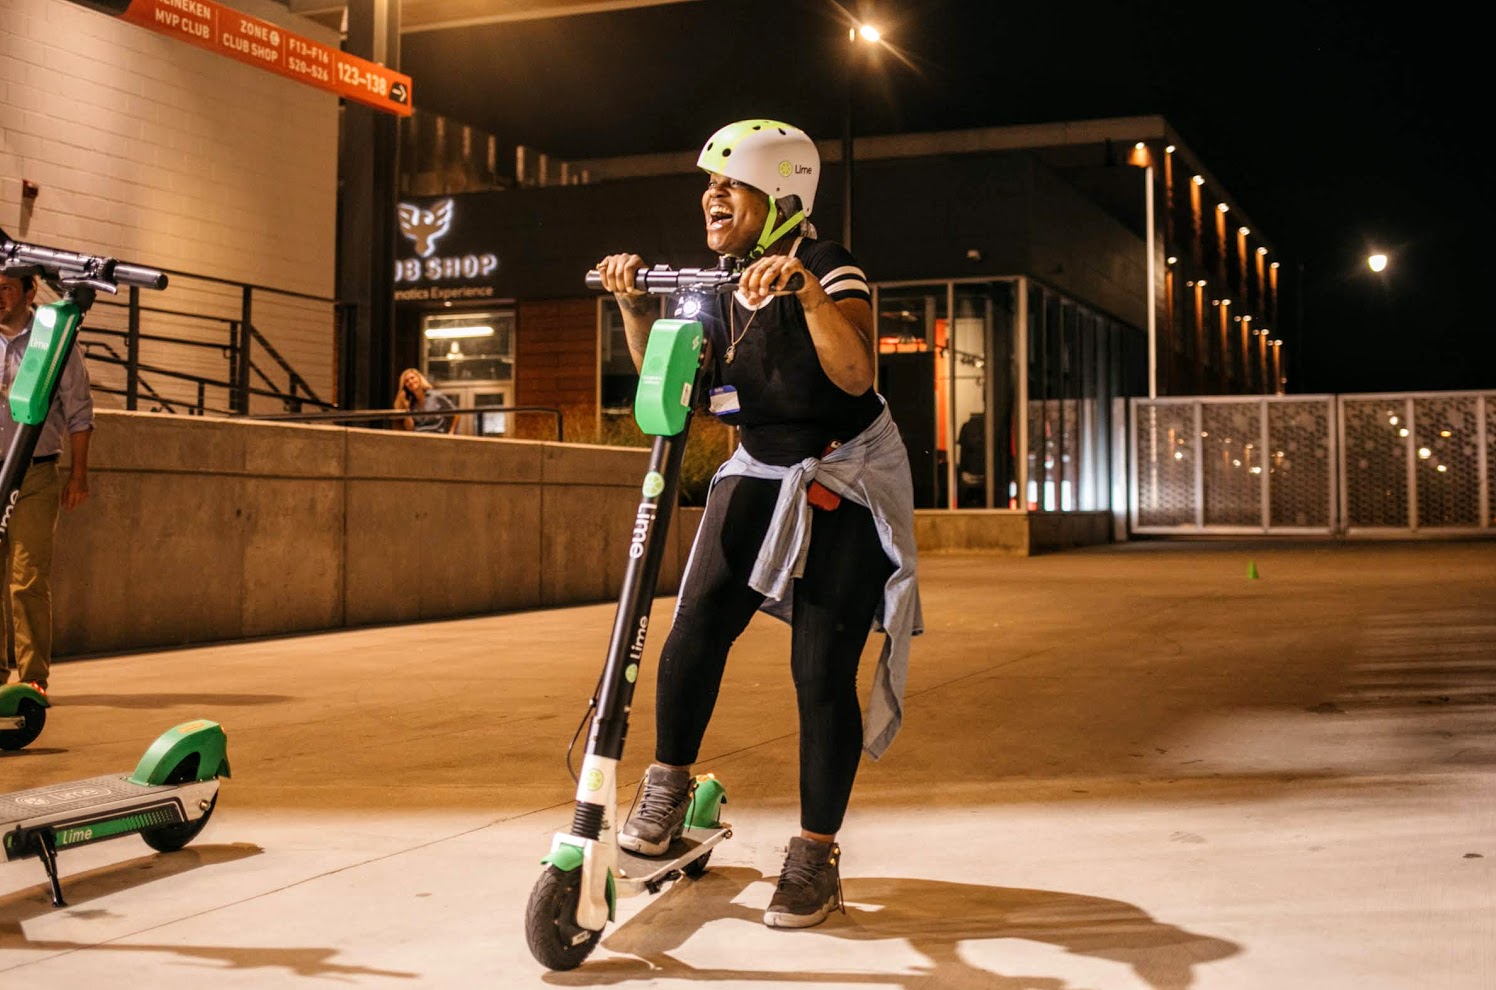 Lime – First Ride Safety Event Helps Bar, Restaurant Workers Navigate At Night